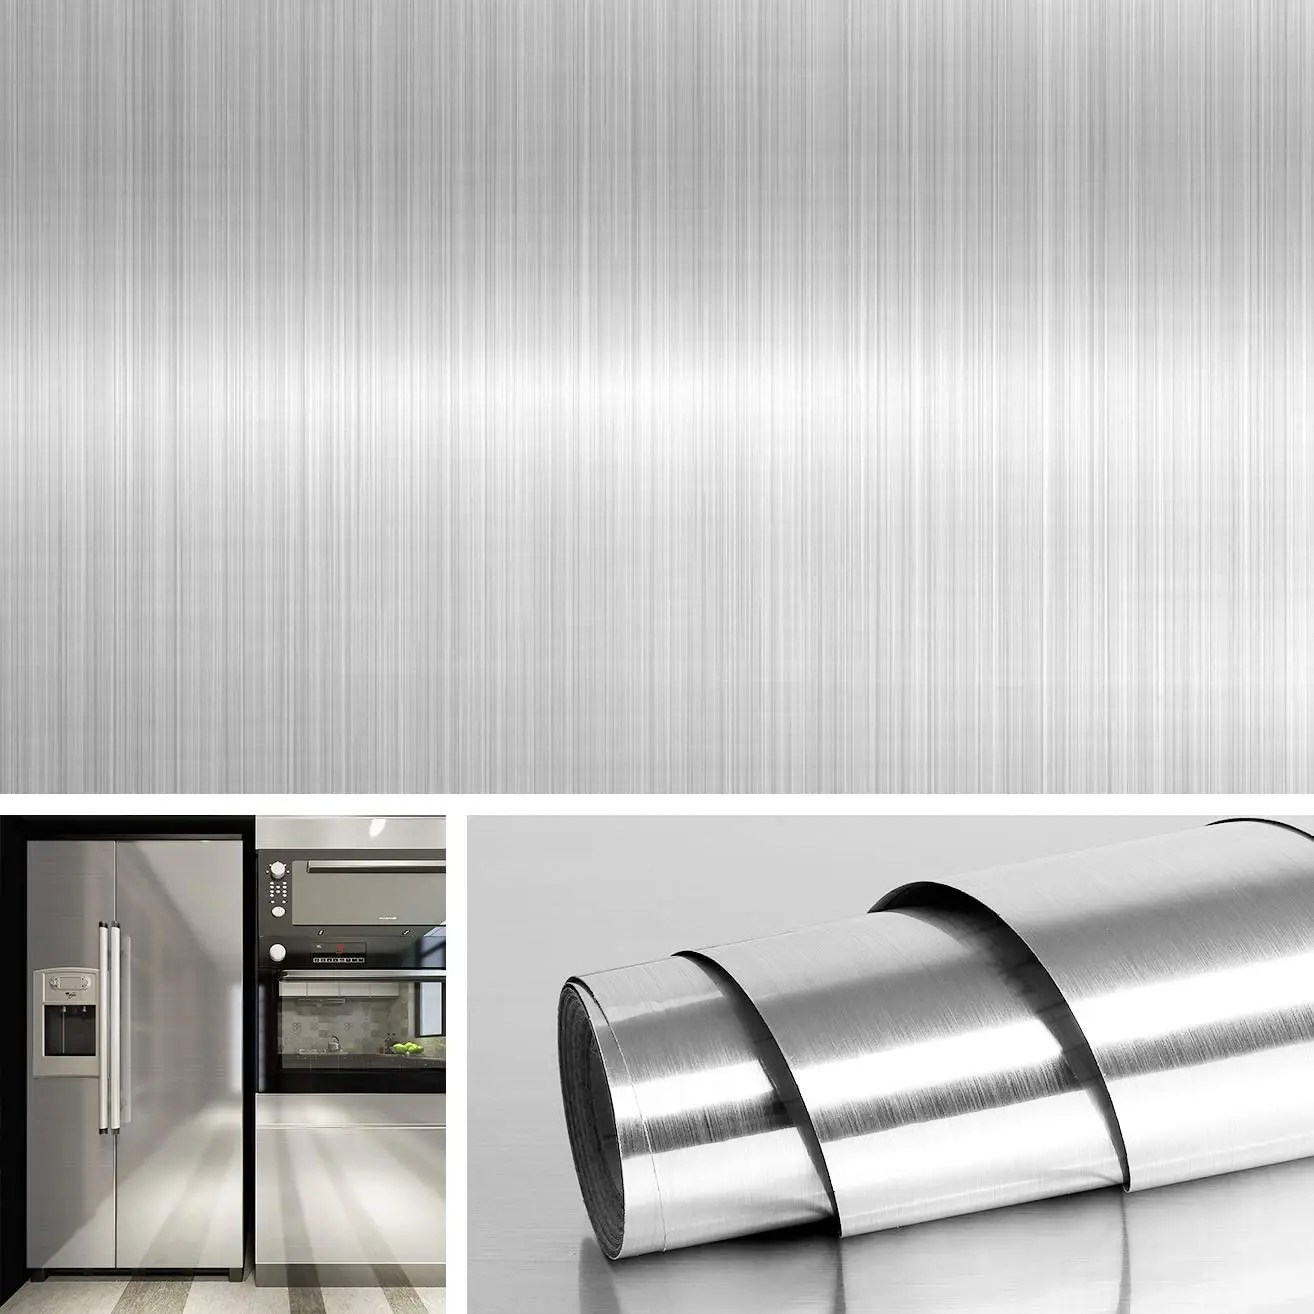 Vinyl Wallpaper Decorative Stainless Steel Wall Papers Count